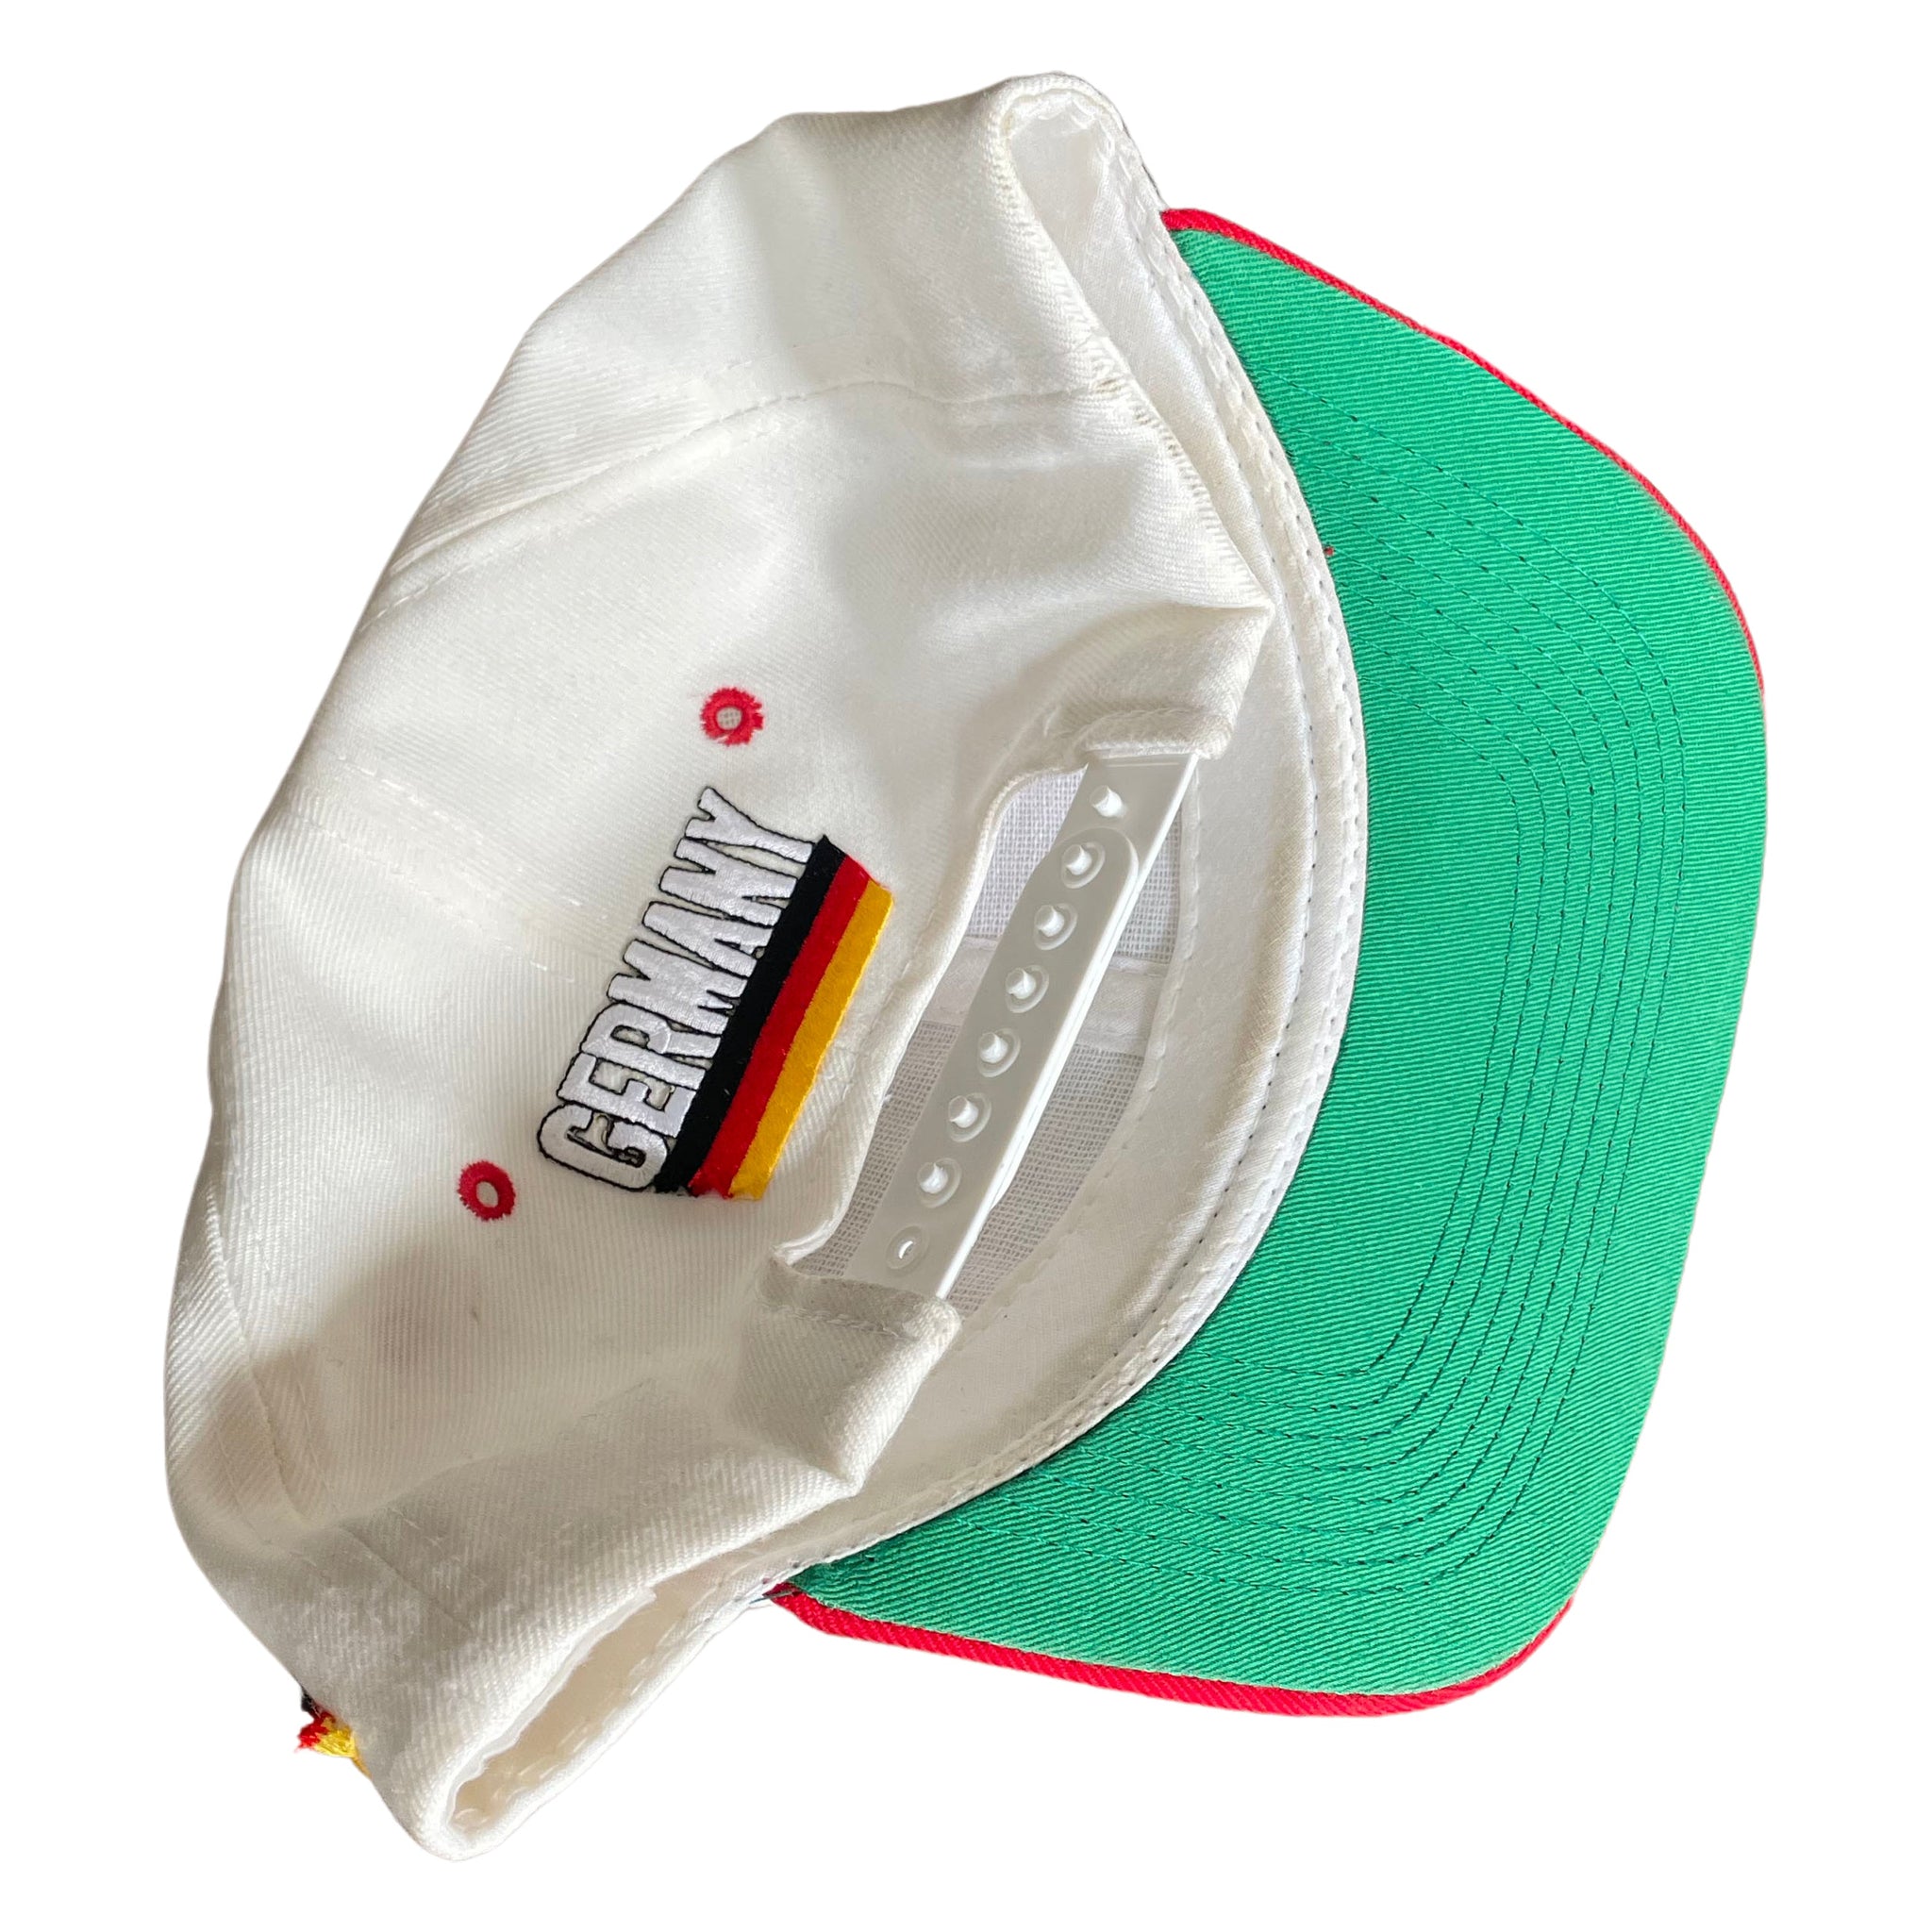 1994 World Cup Germany Hat